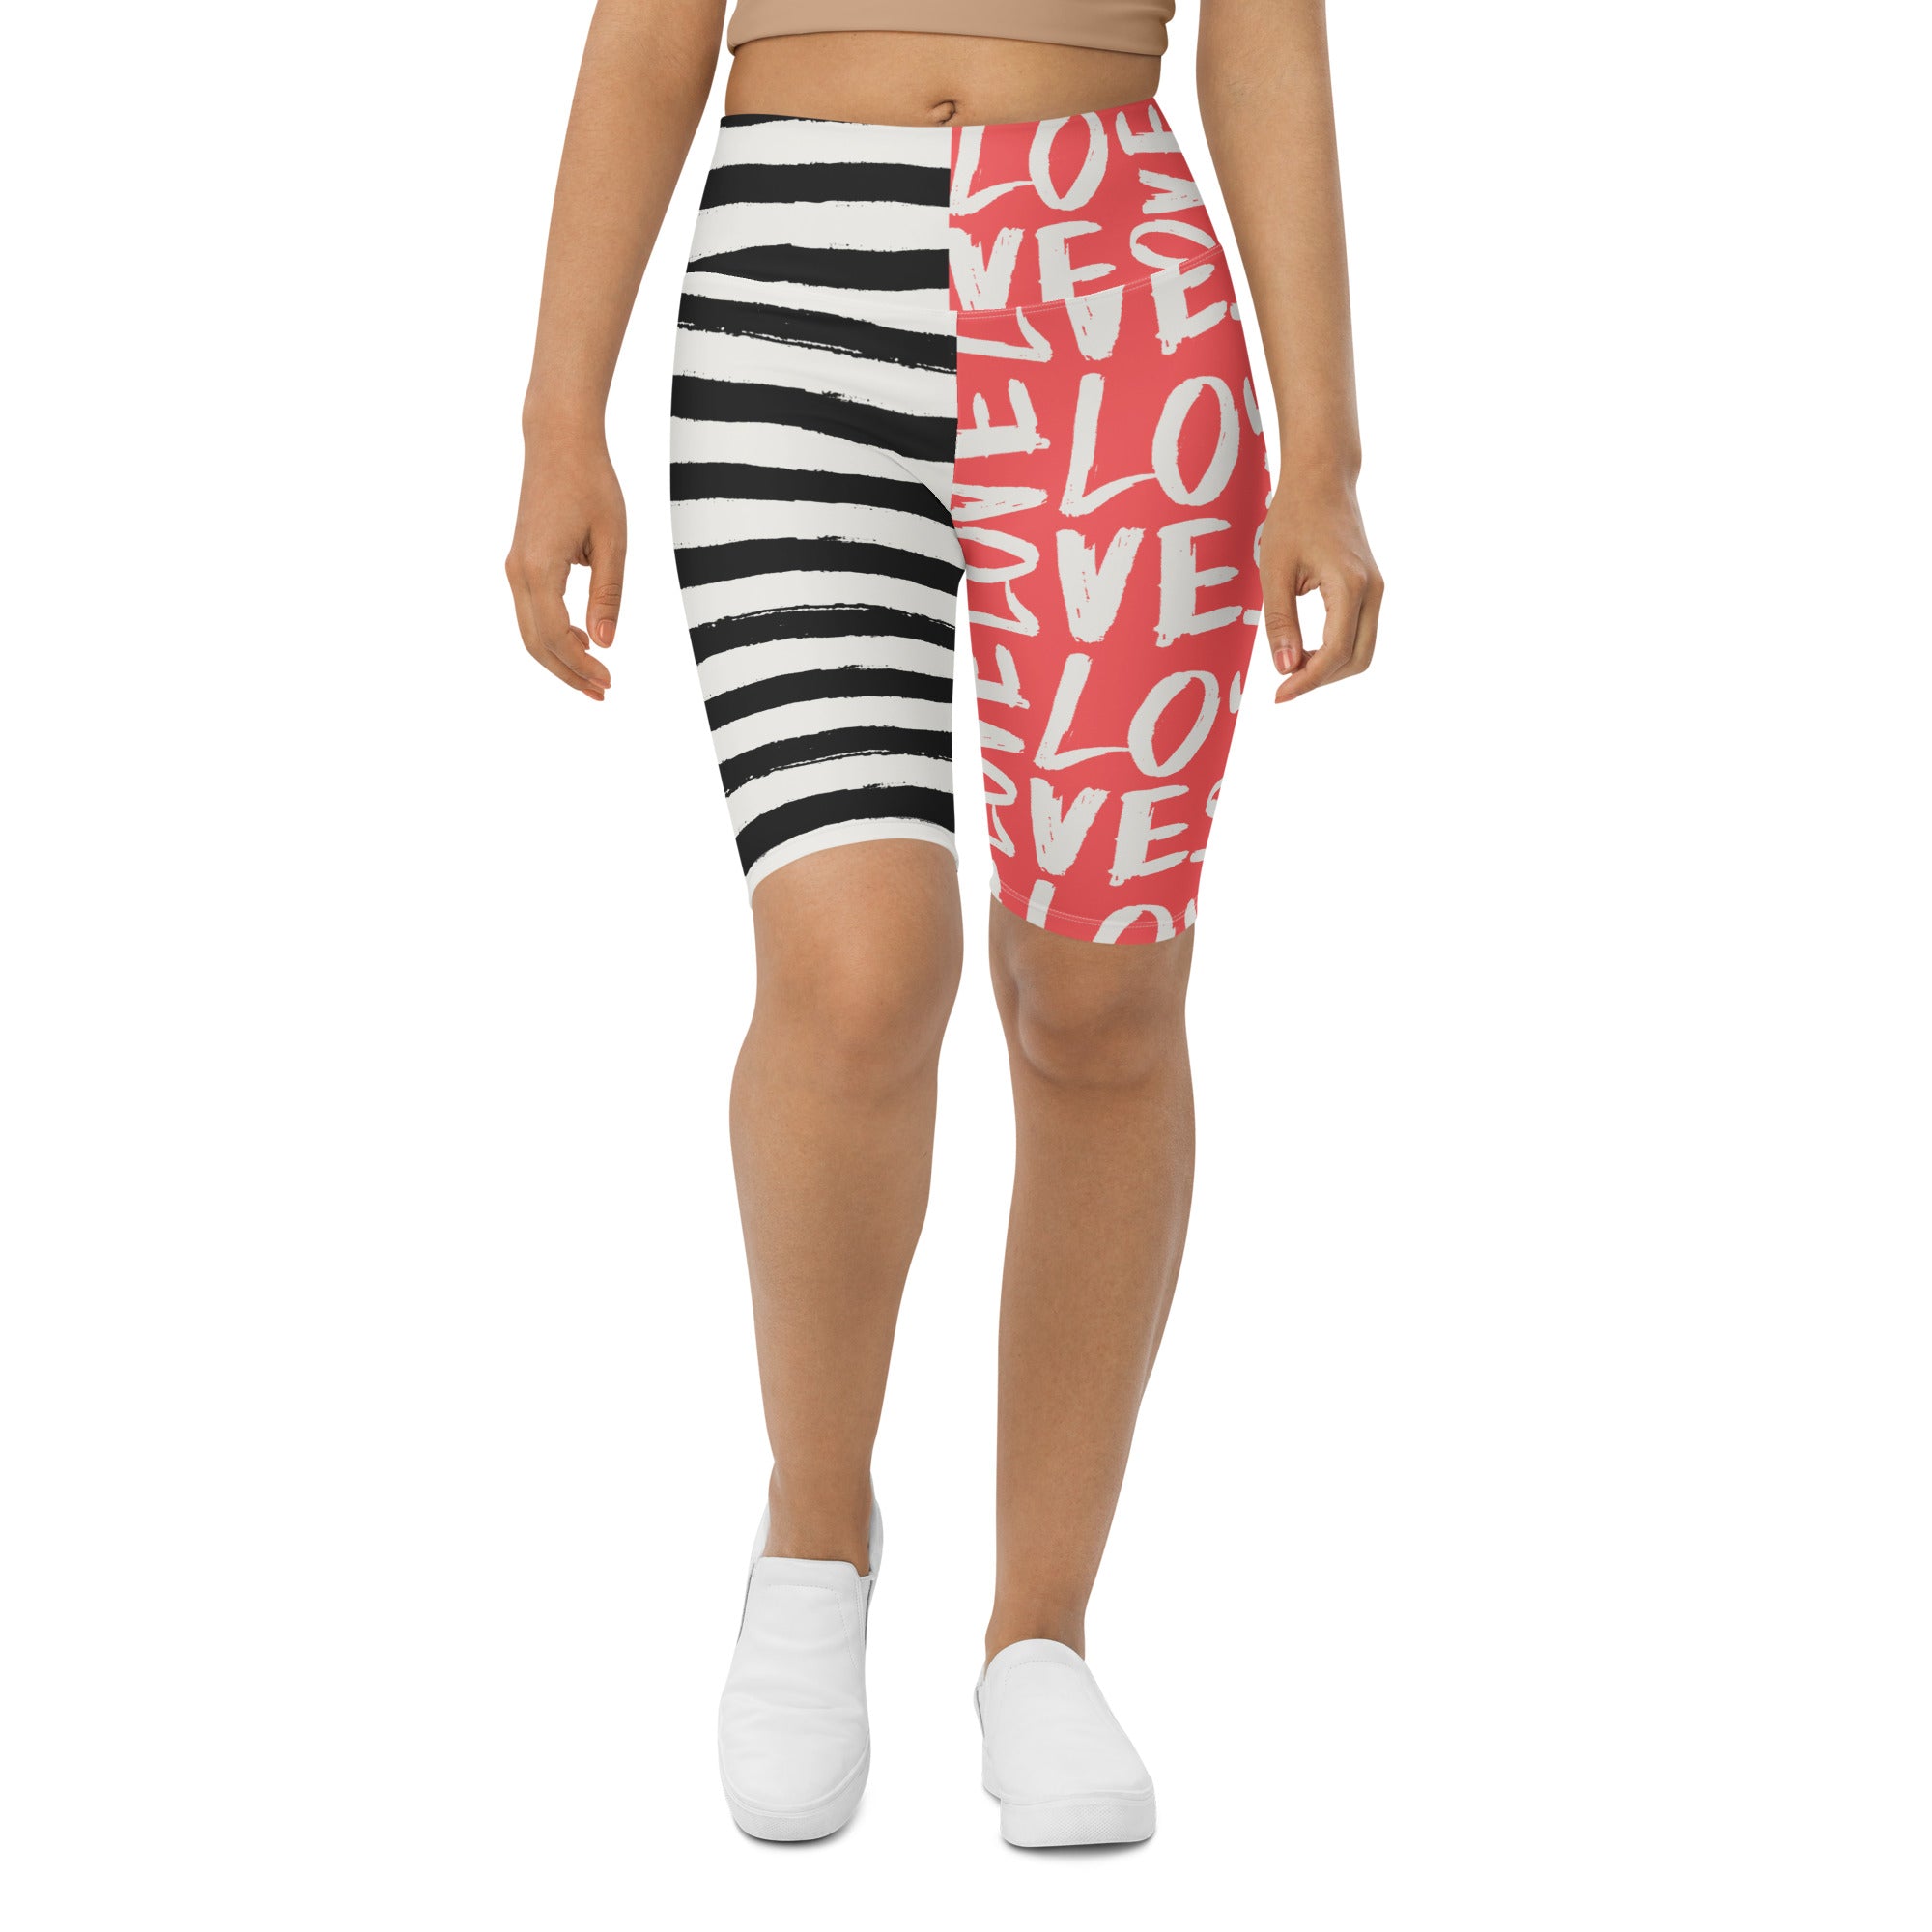 Two-Patterned Valentine's Day Biker Shorts